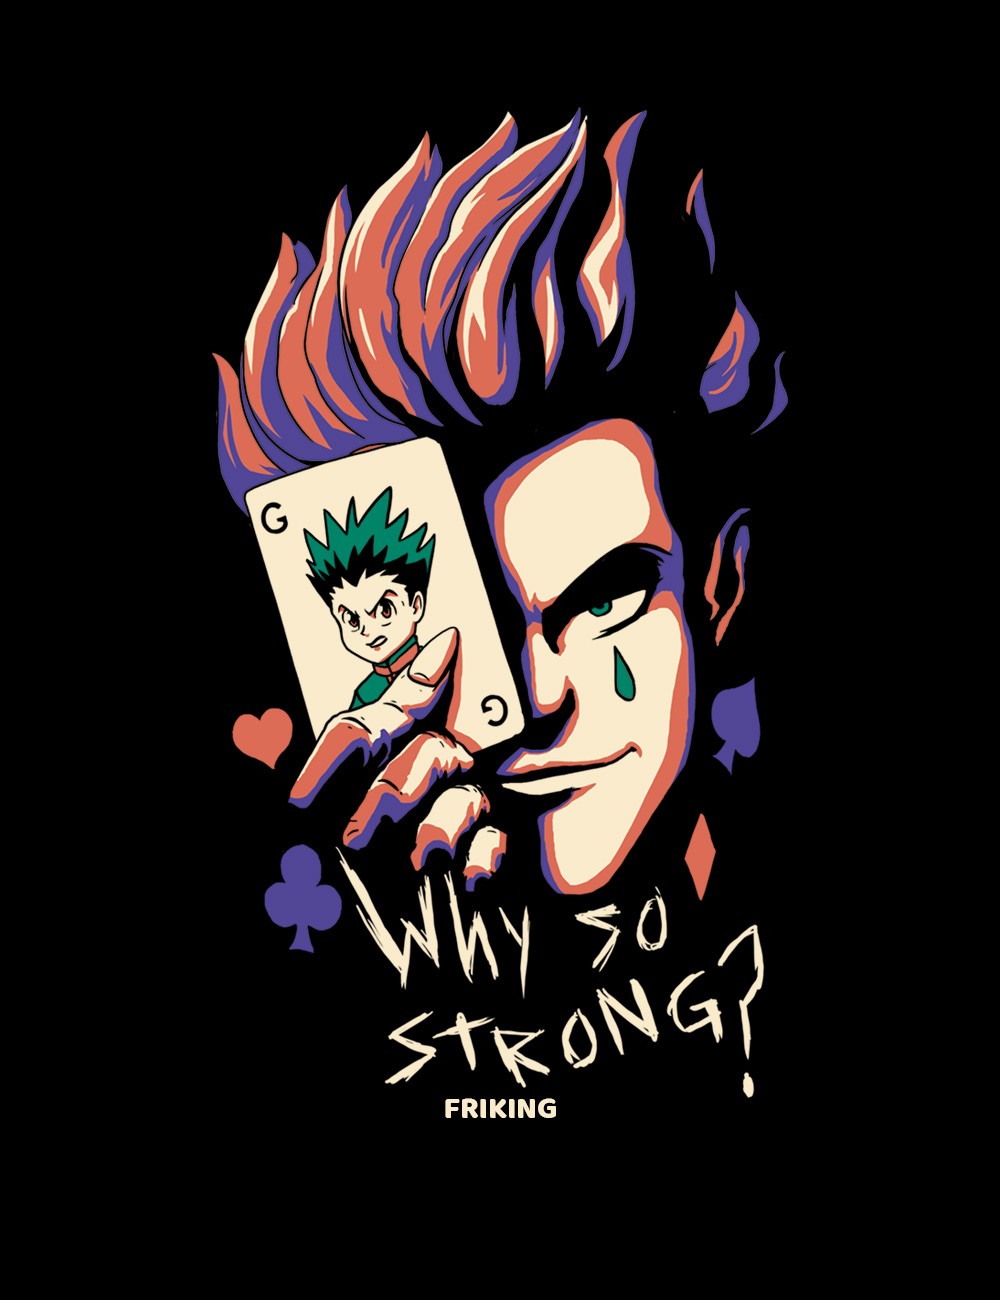 Why so strong?